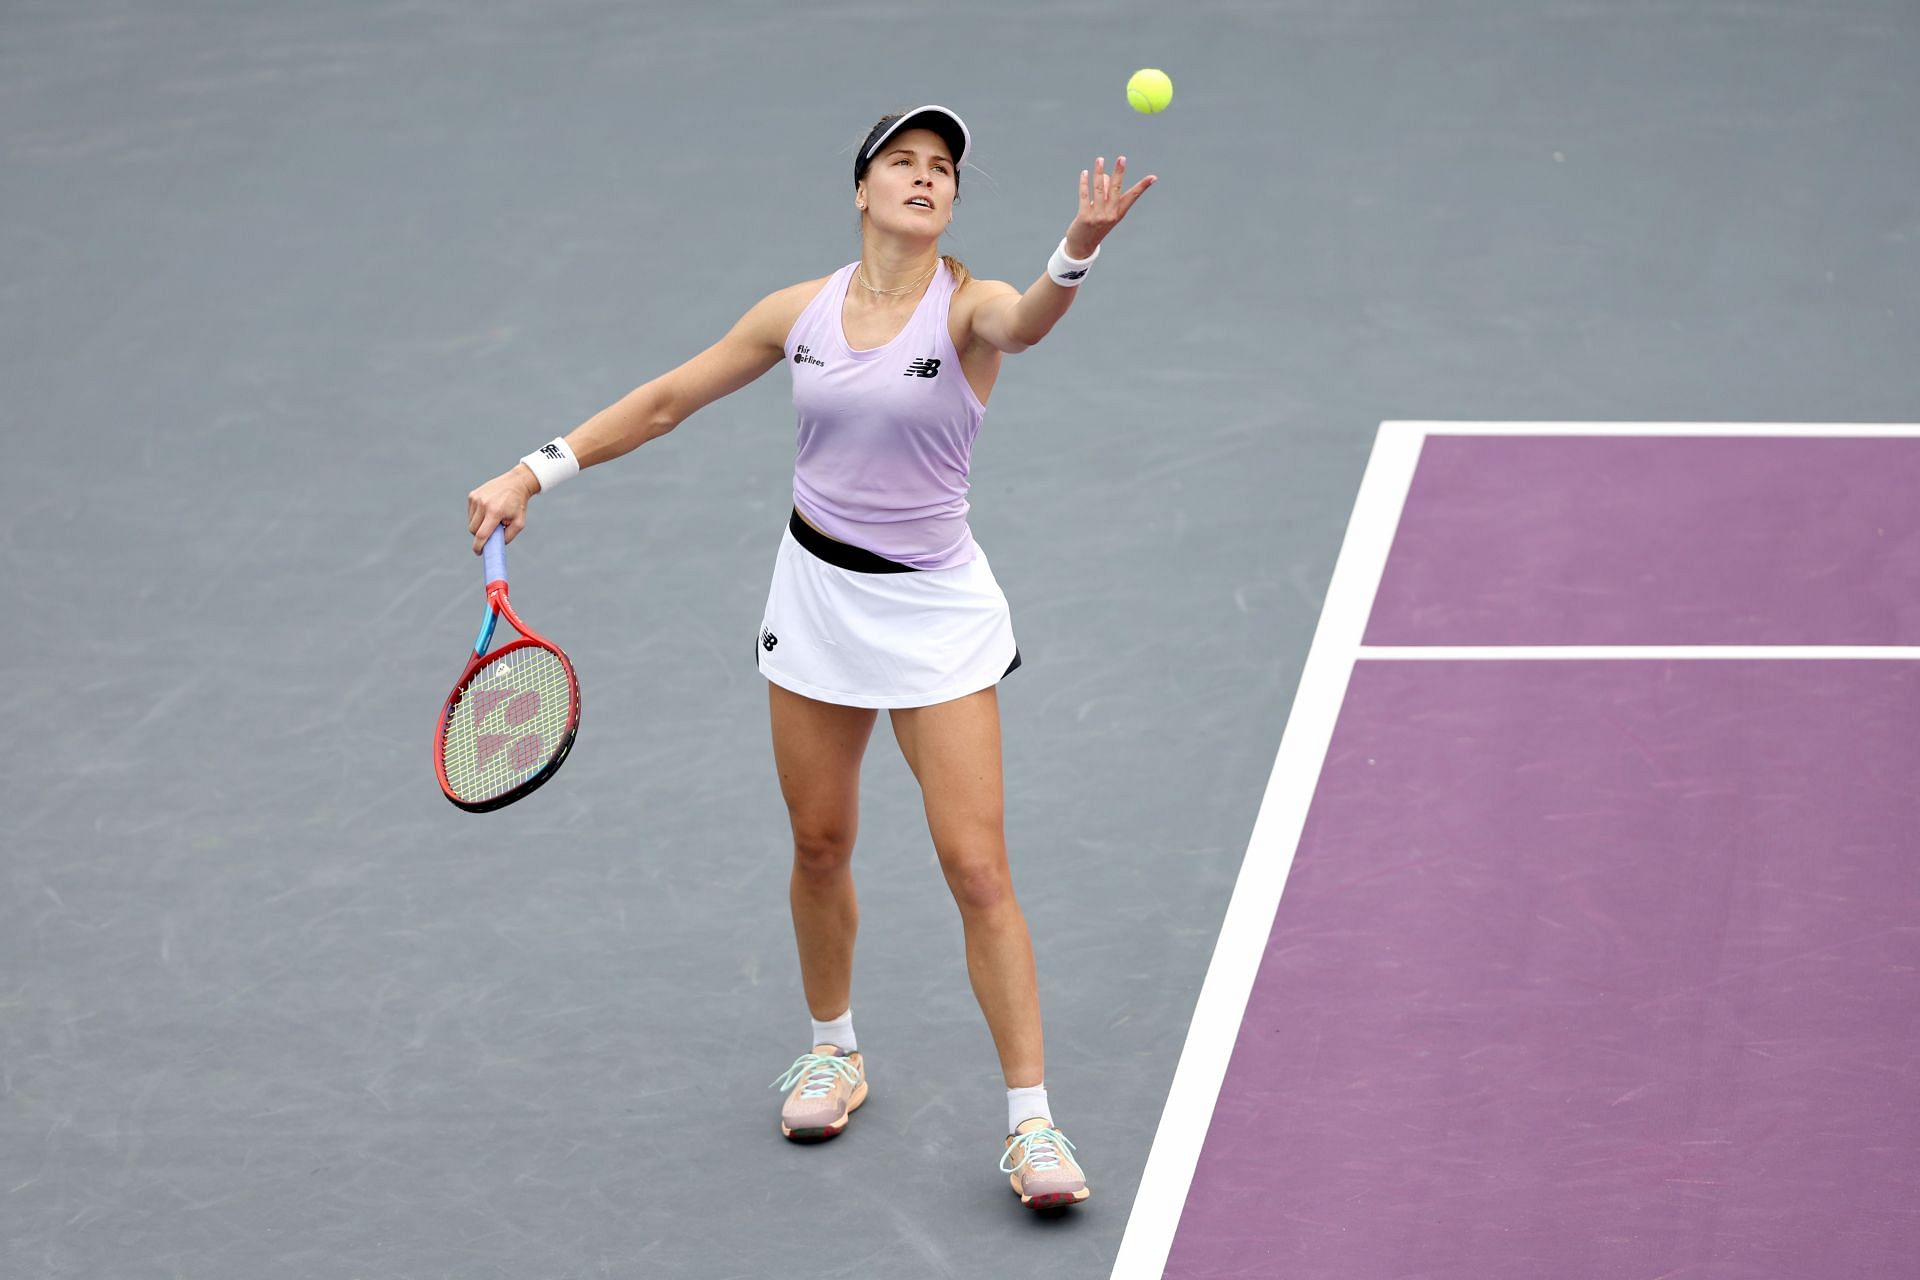 Bouchard serves to Kayla Day on Day 2 of the 2022 Guadalajara Open 